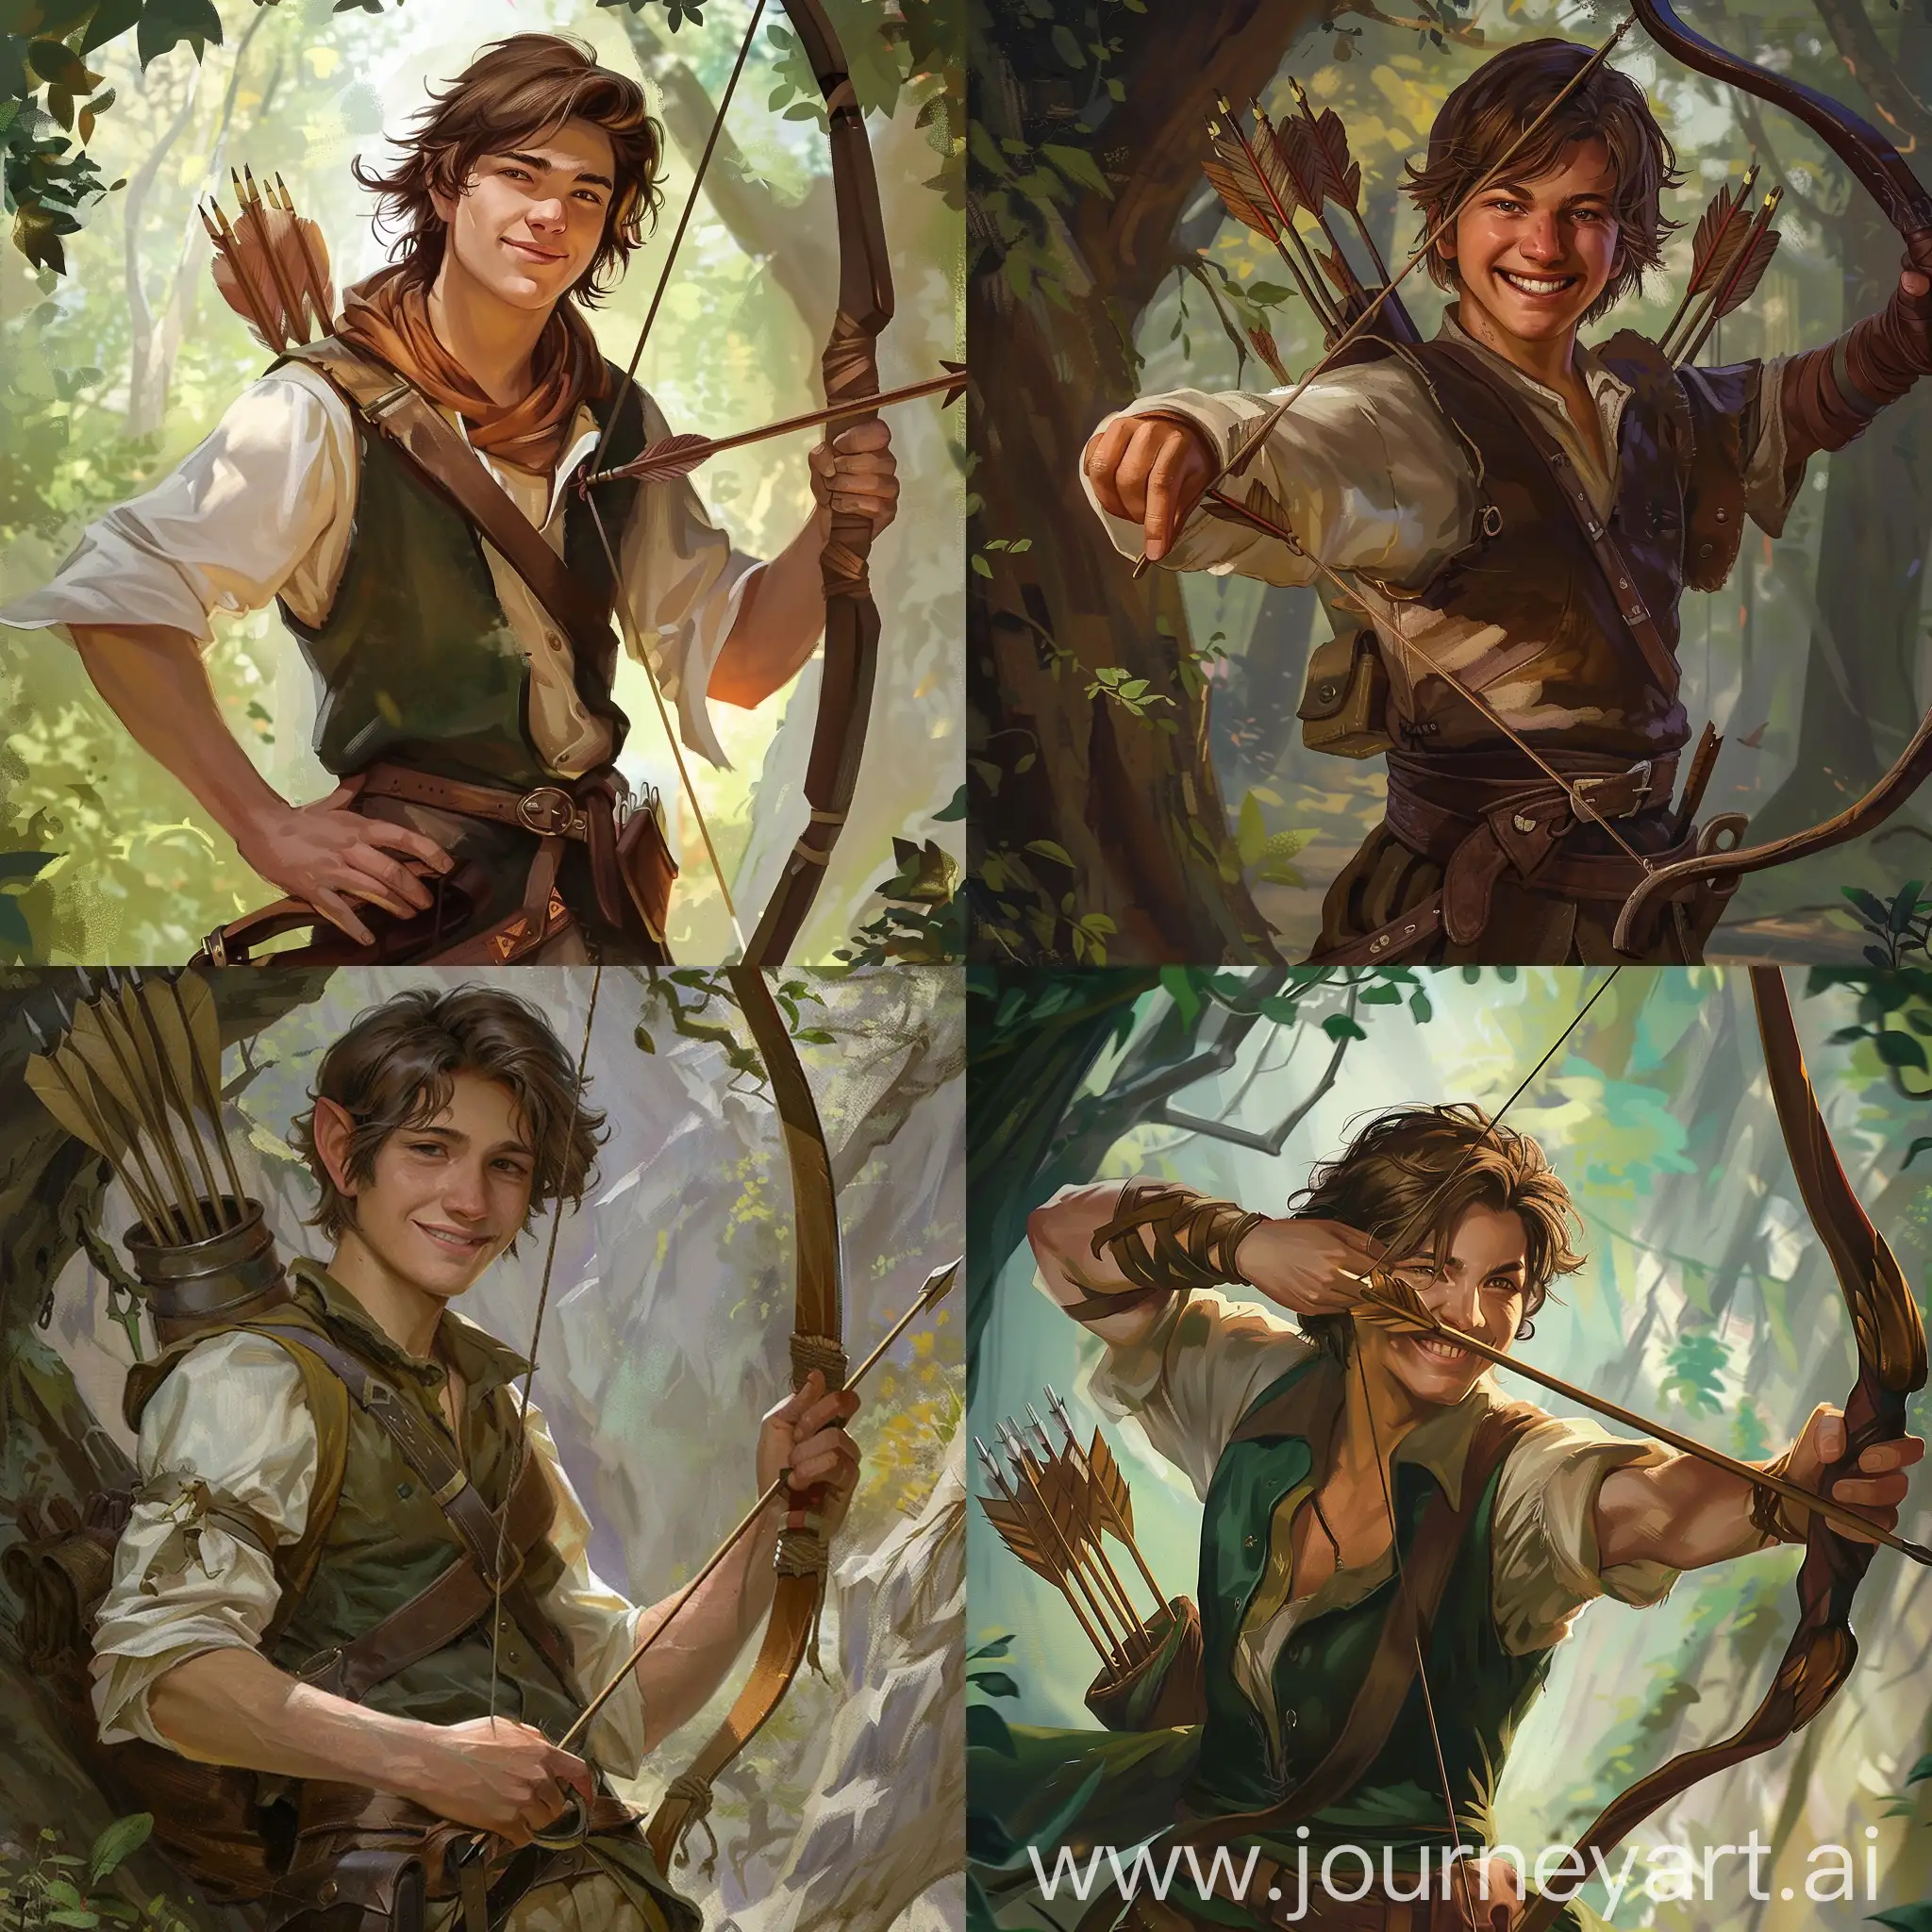 Fantasy huntsman, young male, brown hair, happy, longbow, quiver, modest clothing, humble
